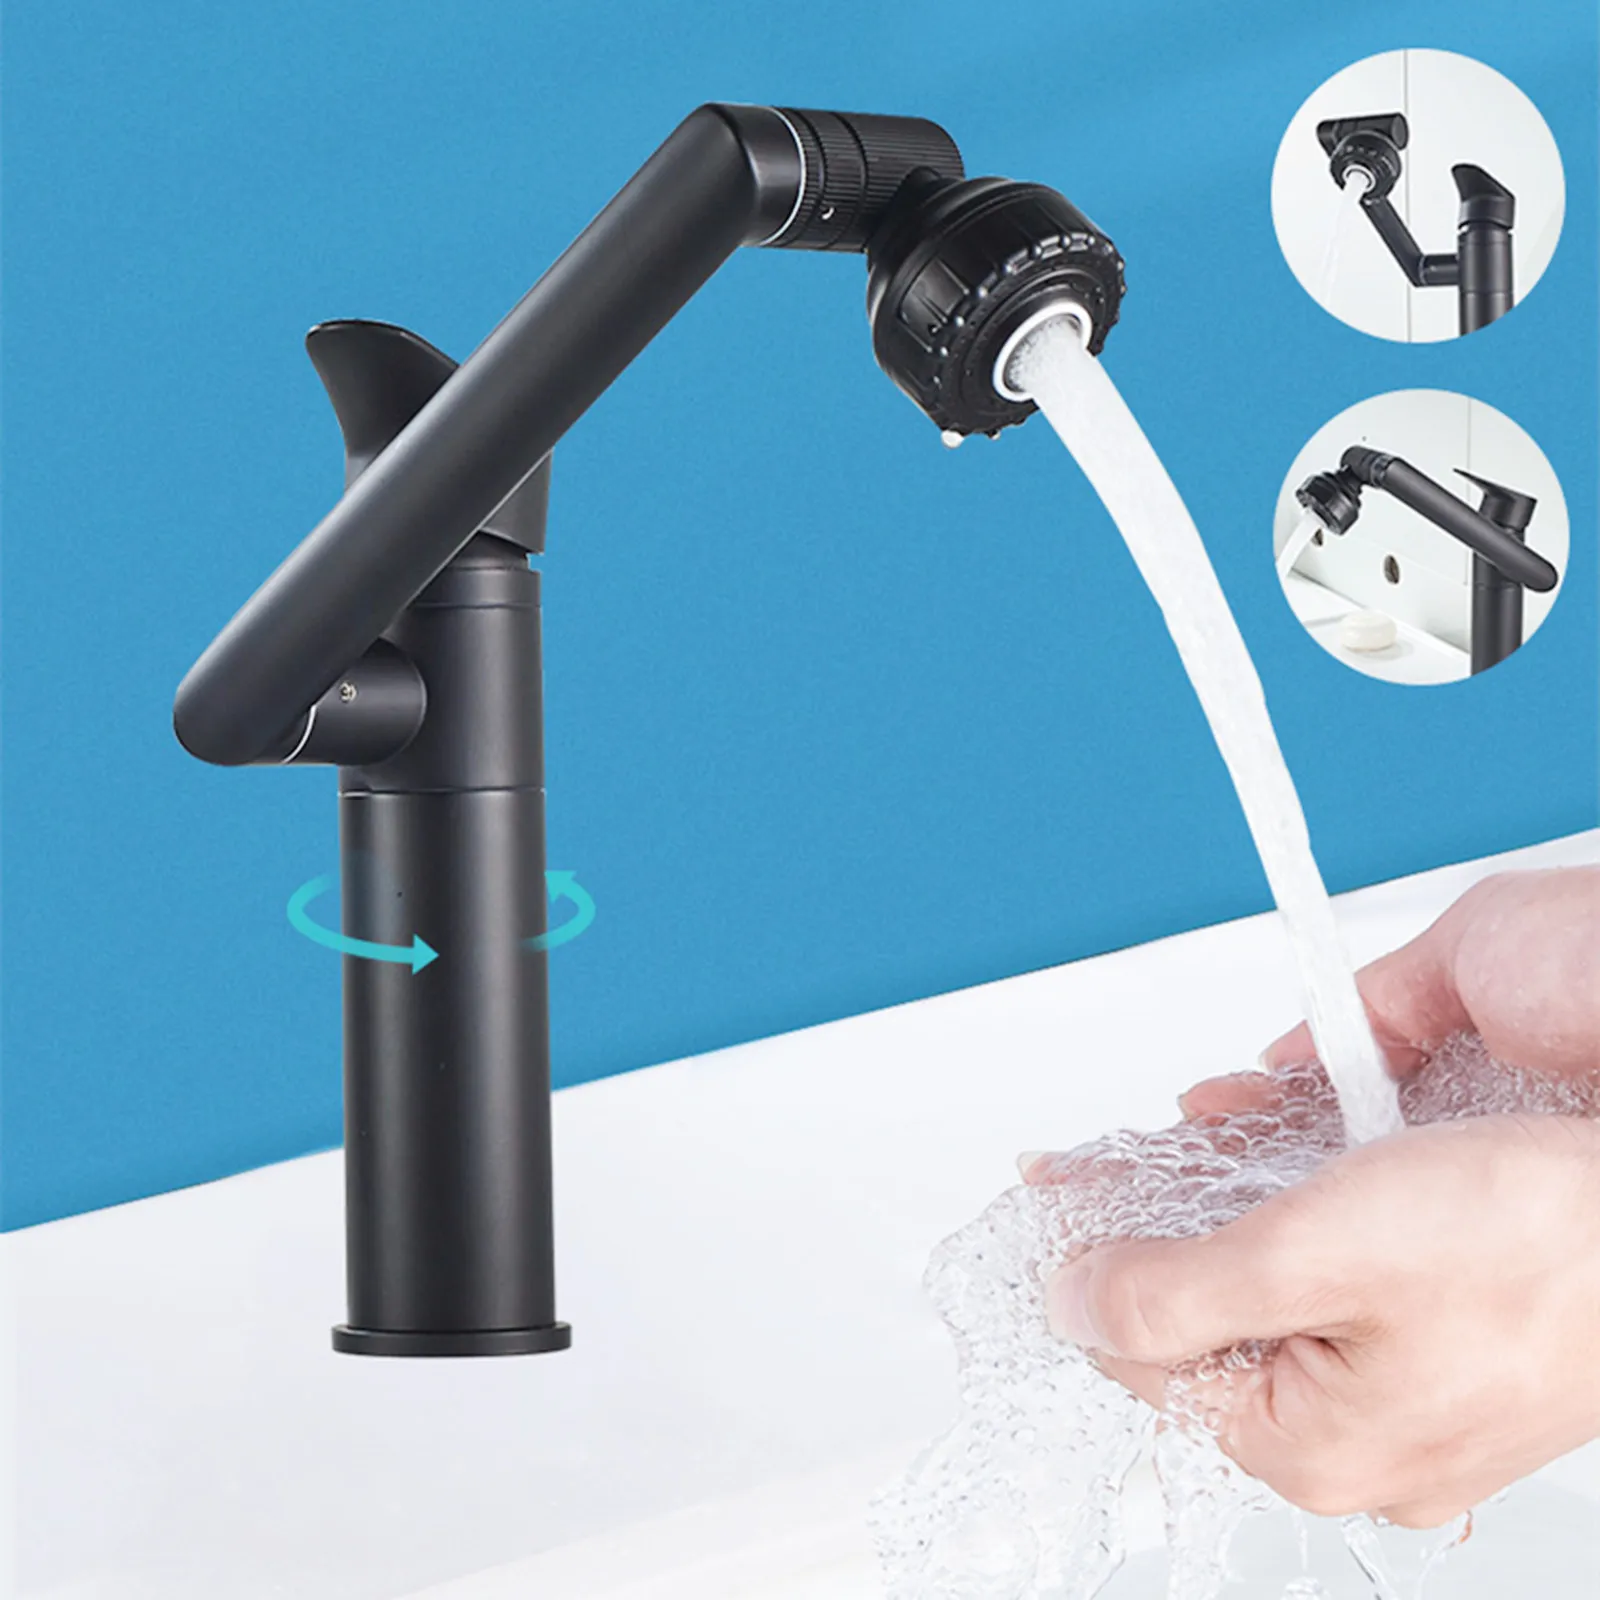 Kitchen Washbasin Faucet 360 Degree Rotating Faucets Hot and Cold Water Adjustable Multifunctional Faucet for Bathroom Sink enlarge